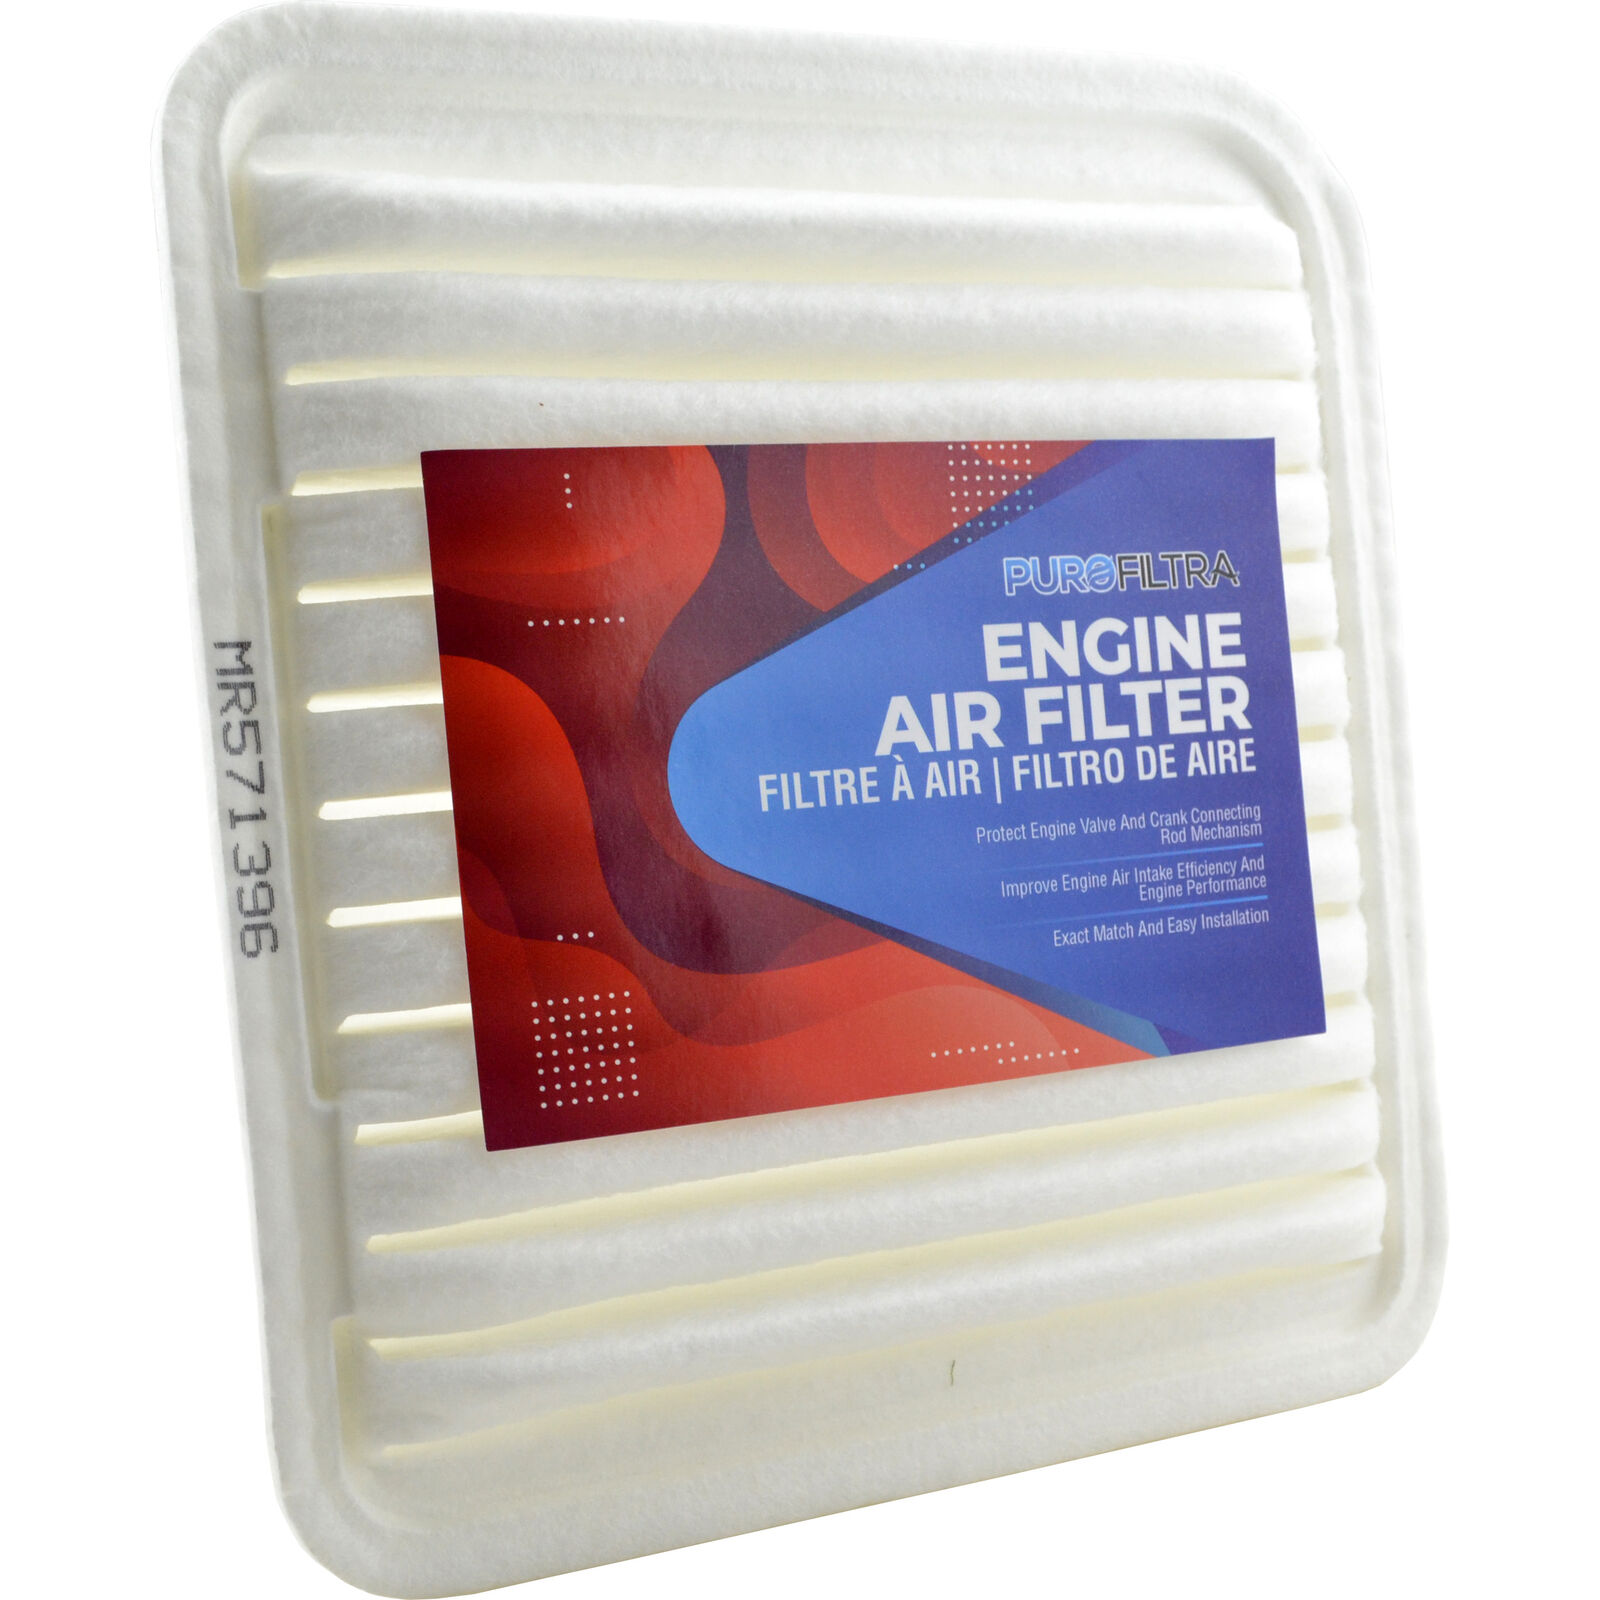 Engine Air Filter for Mitsubishi Eclipse 06-12 Endeavor 04-11 Galant 04-12